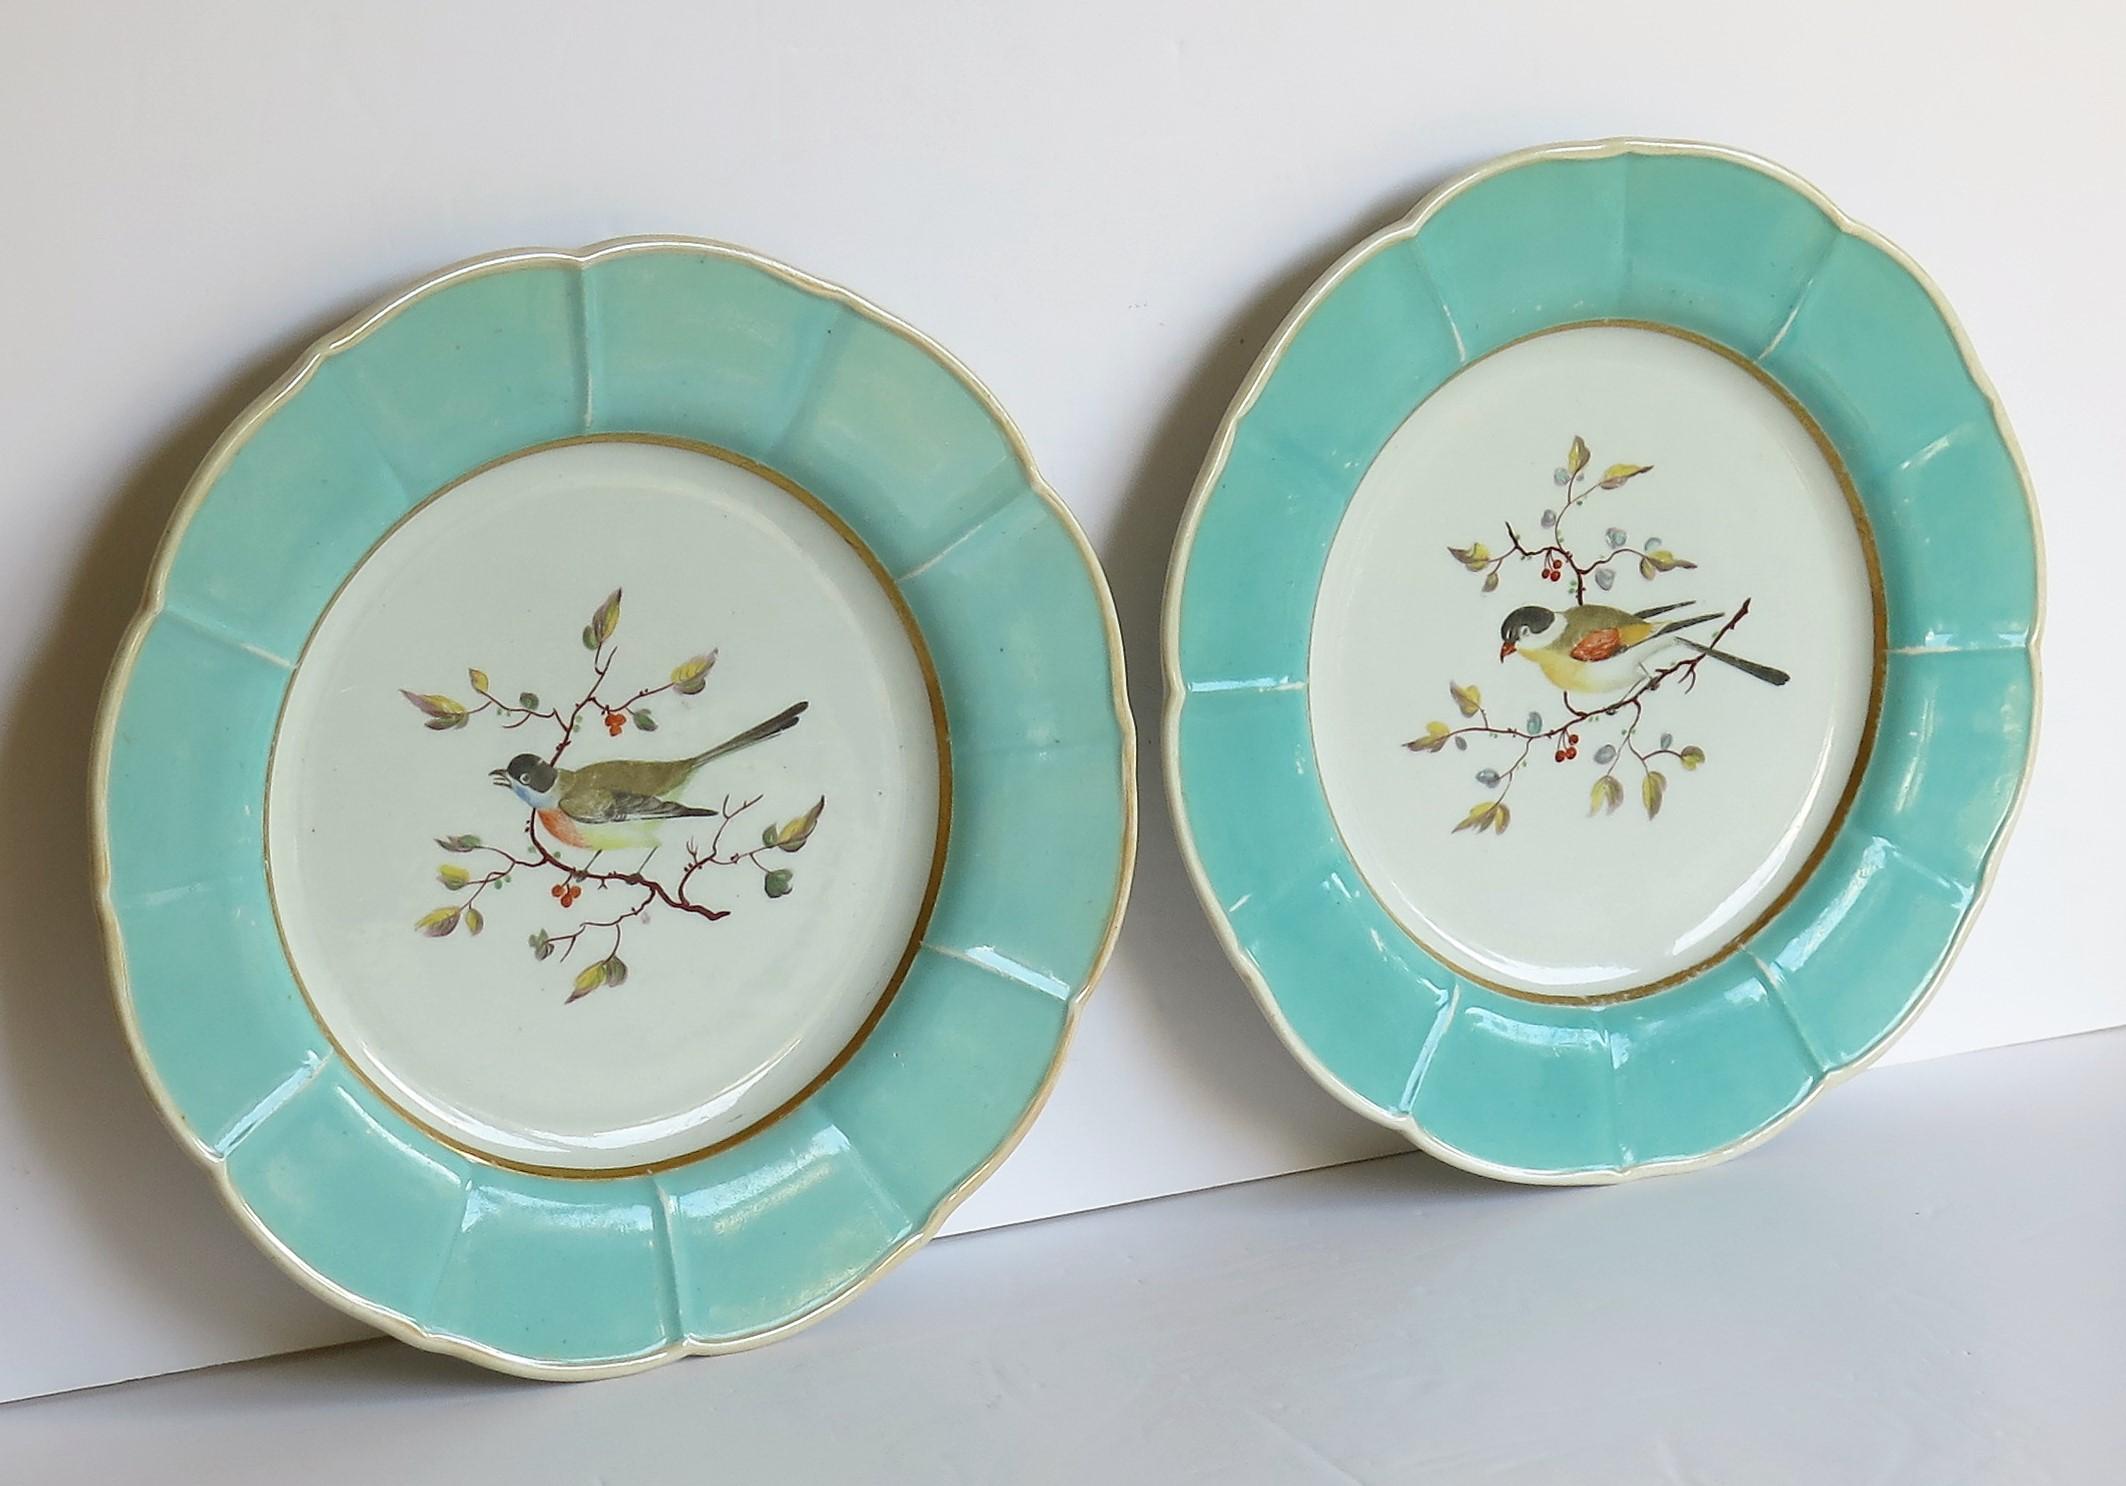 This is a very rare pair of ironstone pottery large Plates or Dishes, hand decorated with different birds perched on a cherry tree branch, produced by the Mason's Factory at Lane Delph, Staffordshire, England, circa 1815 to 1820. 

The plates are